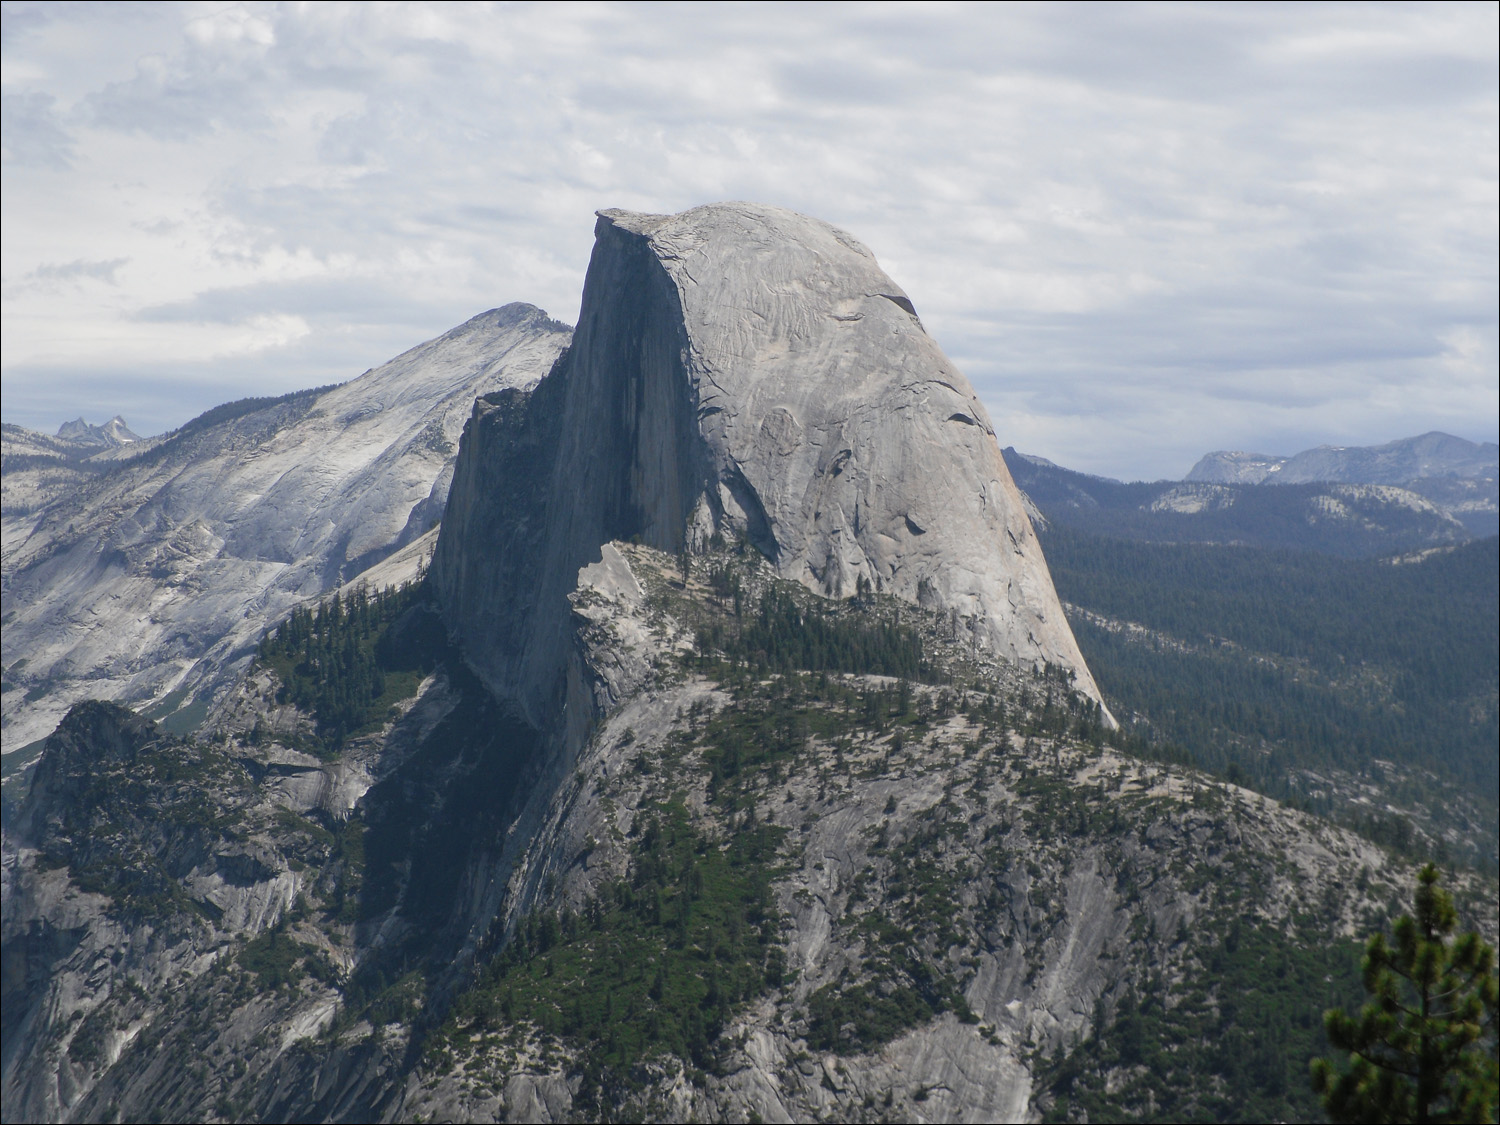 Hike up to Glacier Point- View of Half Dome from Glacier Point